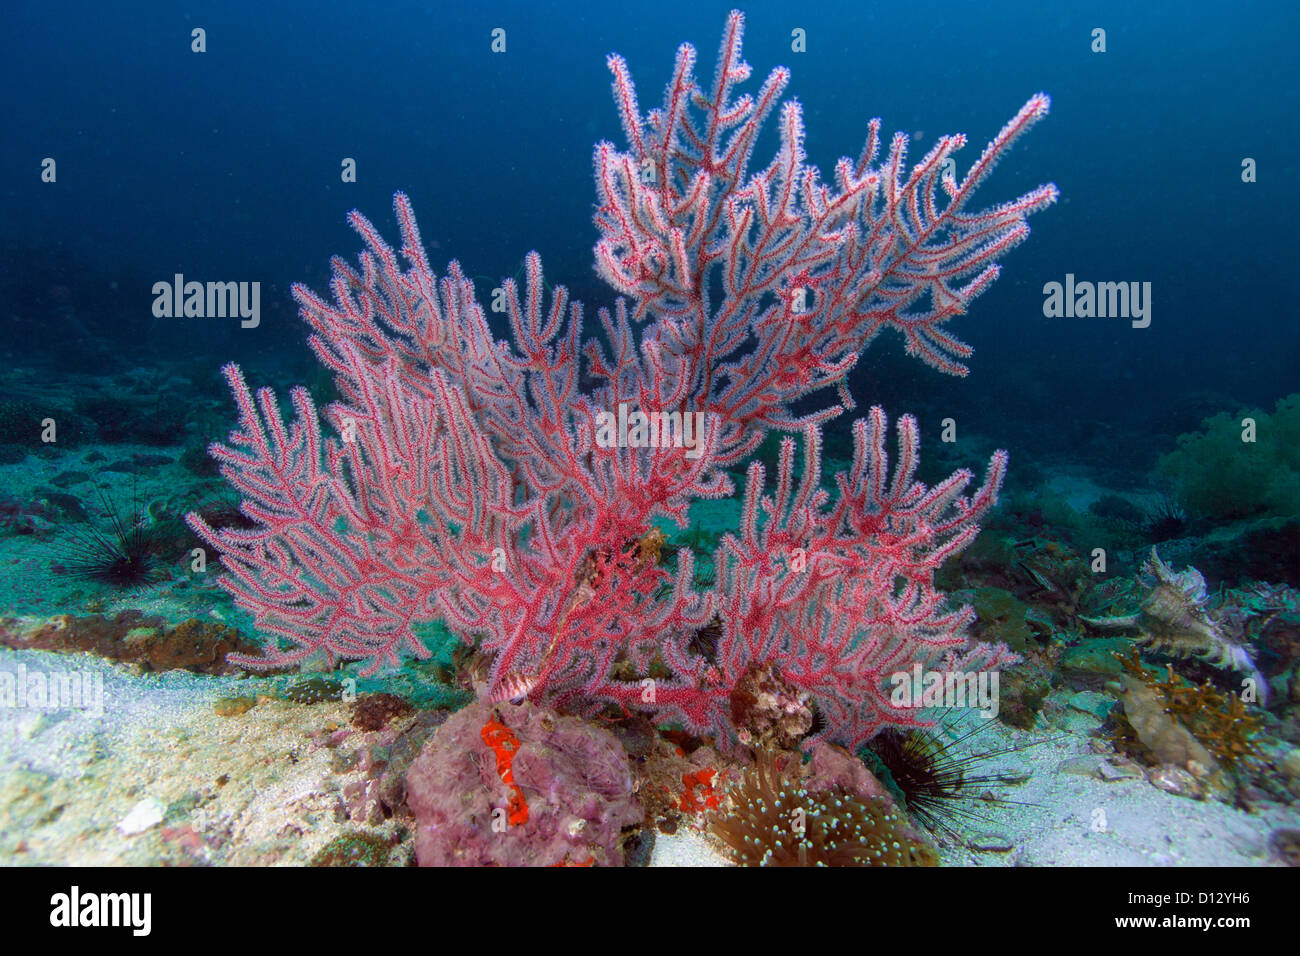 Colorful red fan, Scleraxonia in the coral reef, Philippines, Asia Stock Photo